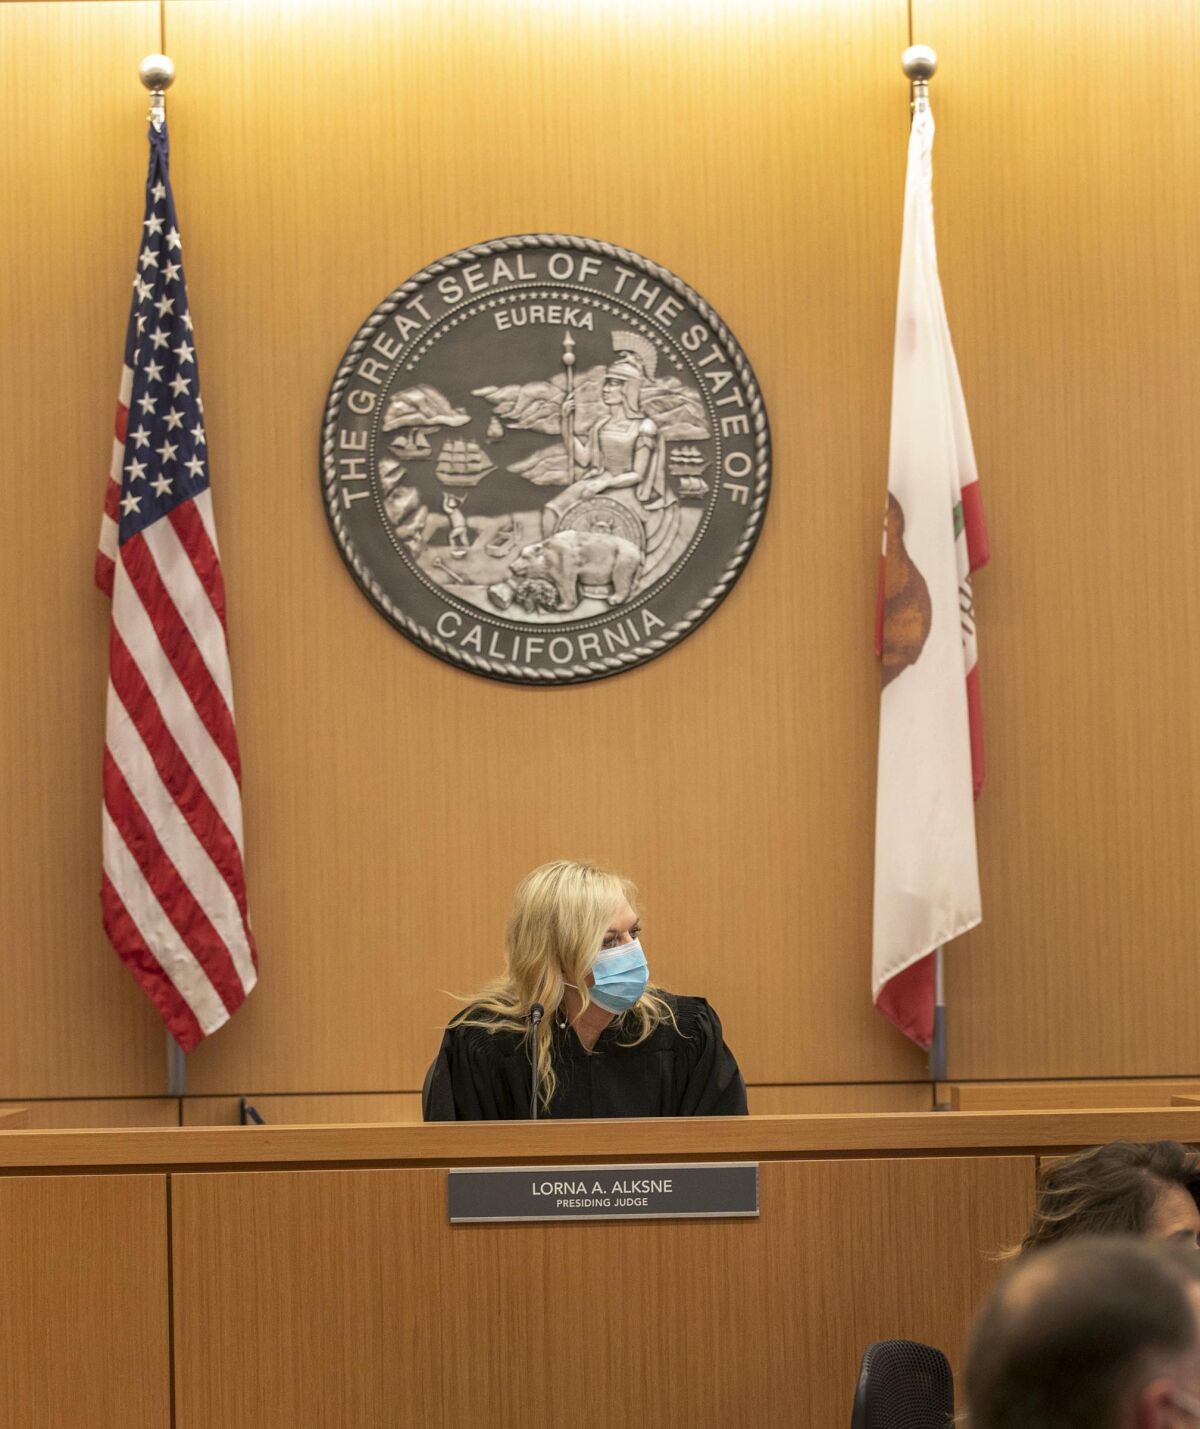 Presiding judge Lorna Alskne held the first video court case in San Diego under the new COVID-19 pandemic.